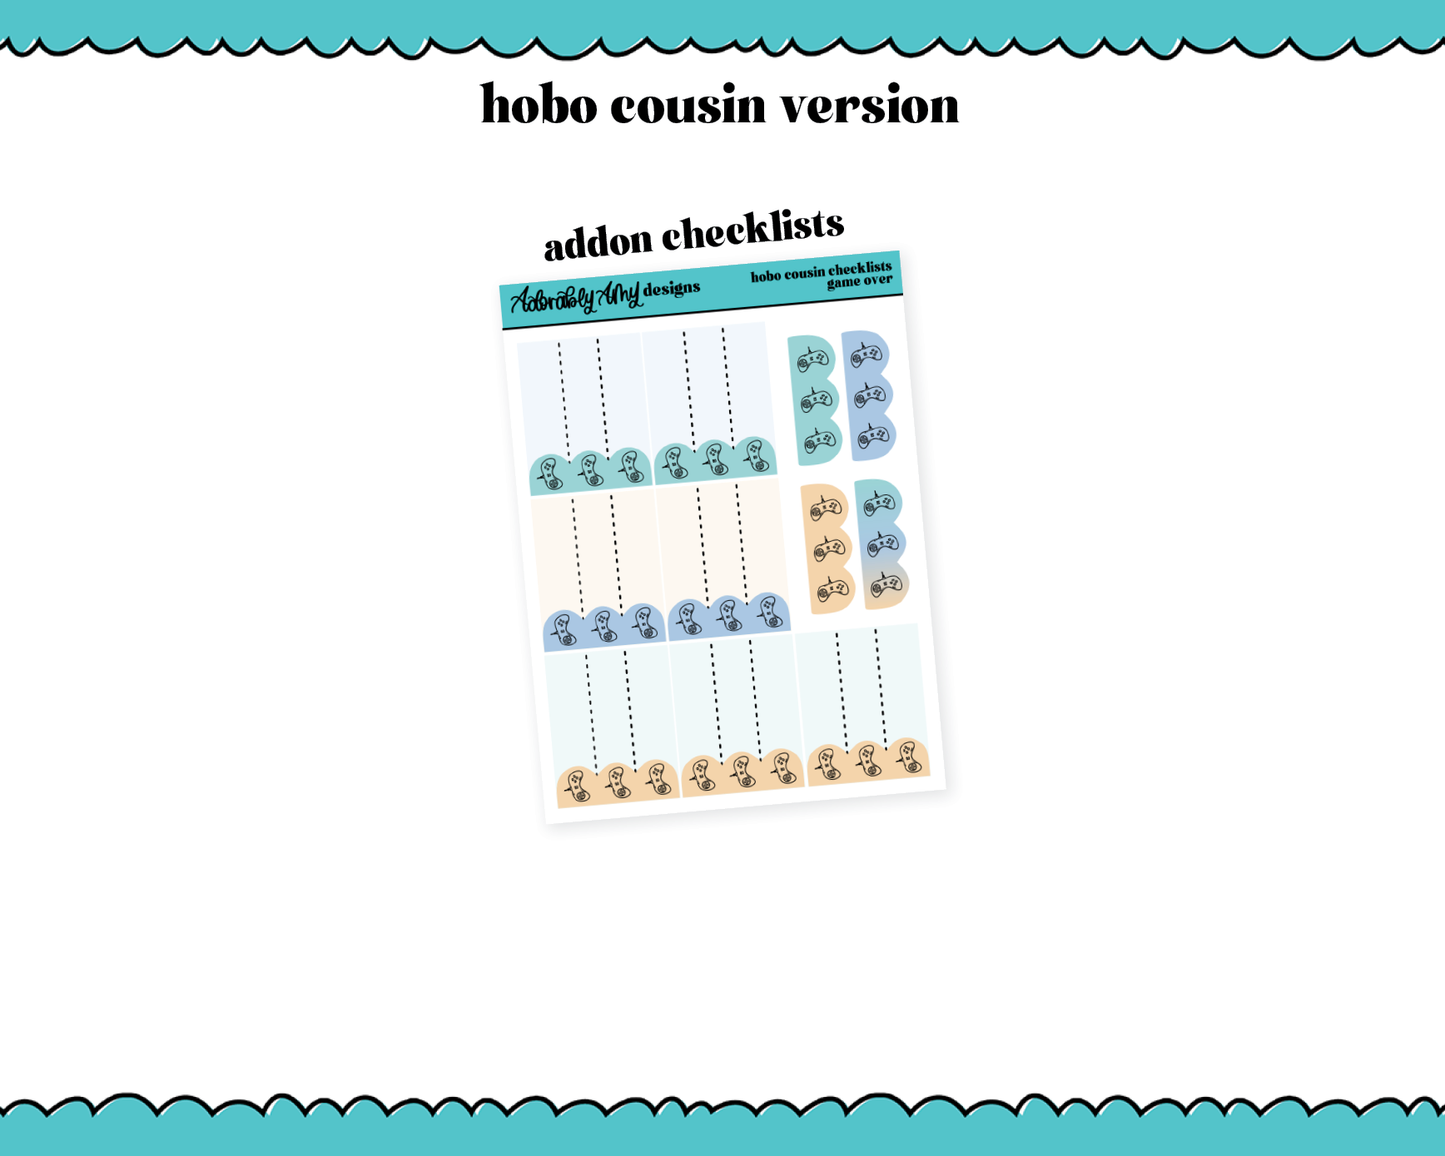 Hobonichi Cousin Weekly Game Over Watercolor Planner Sticker Kit for Hobo Cousin or Similar Planners